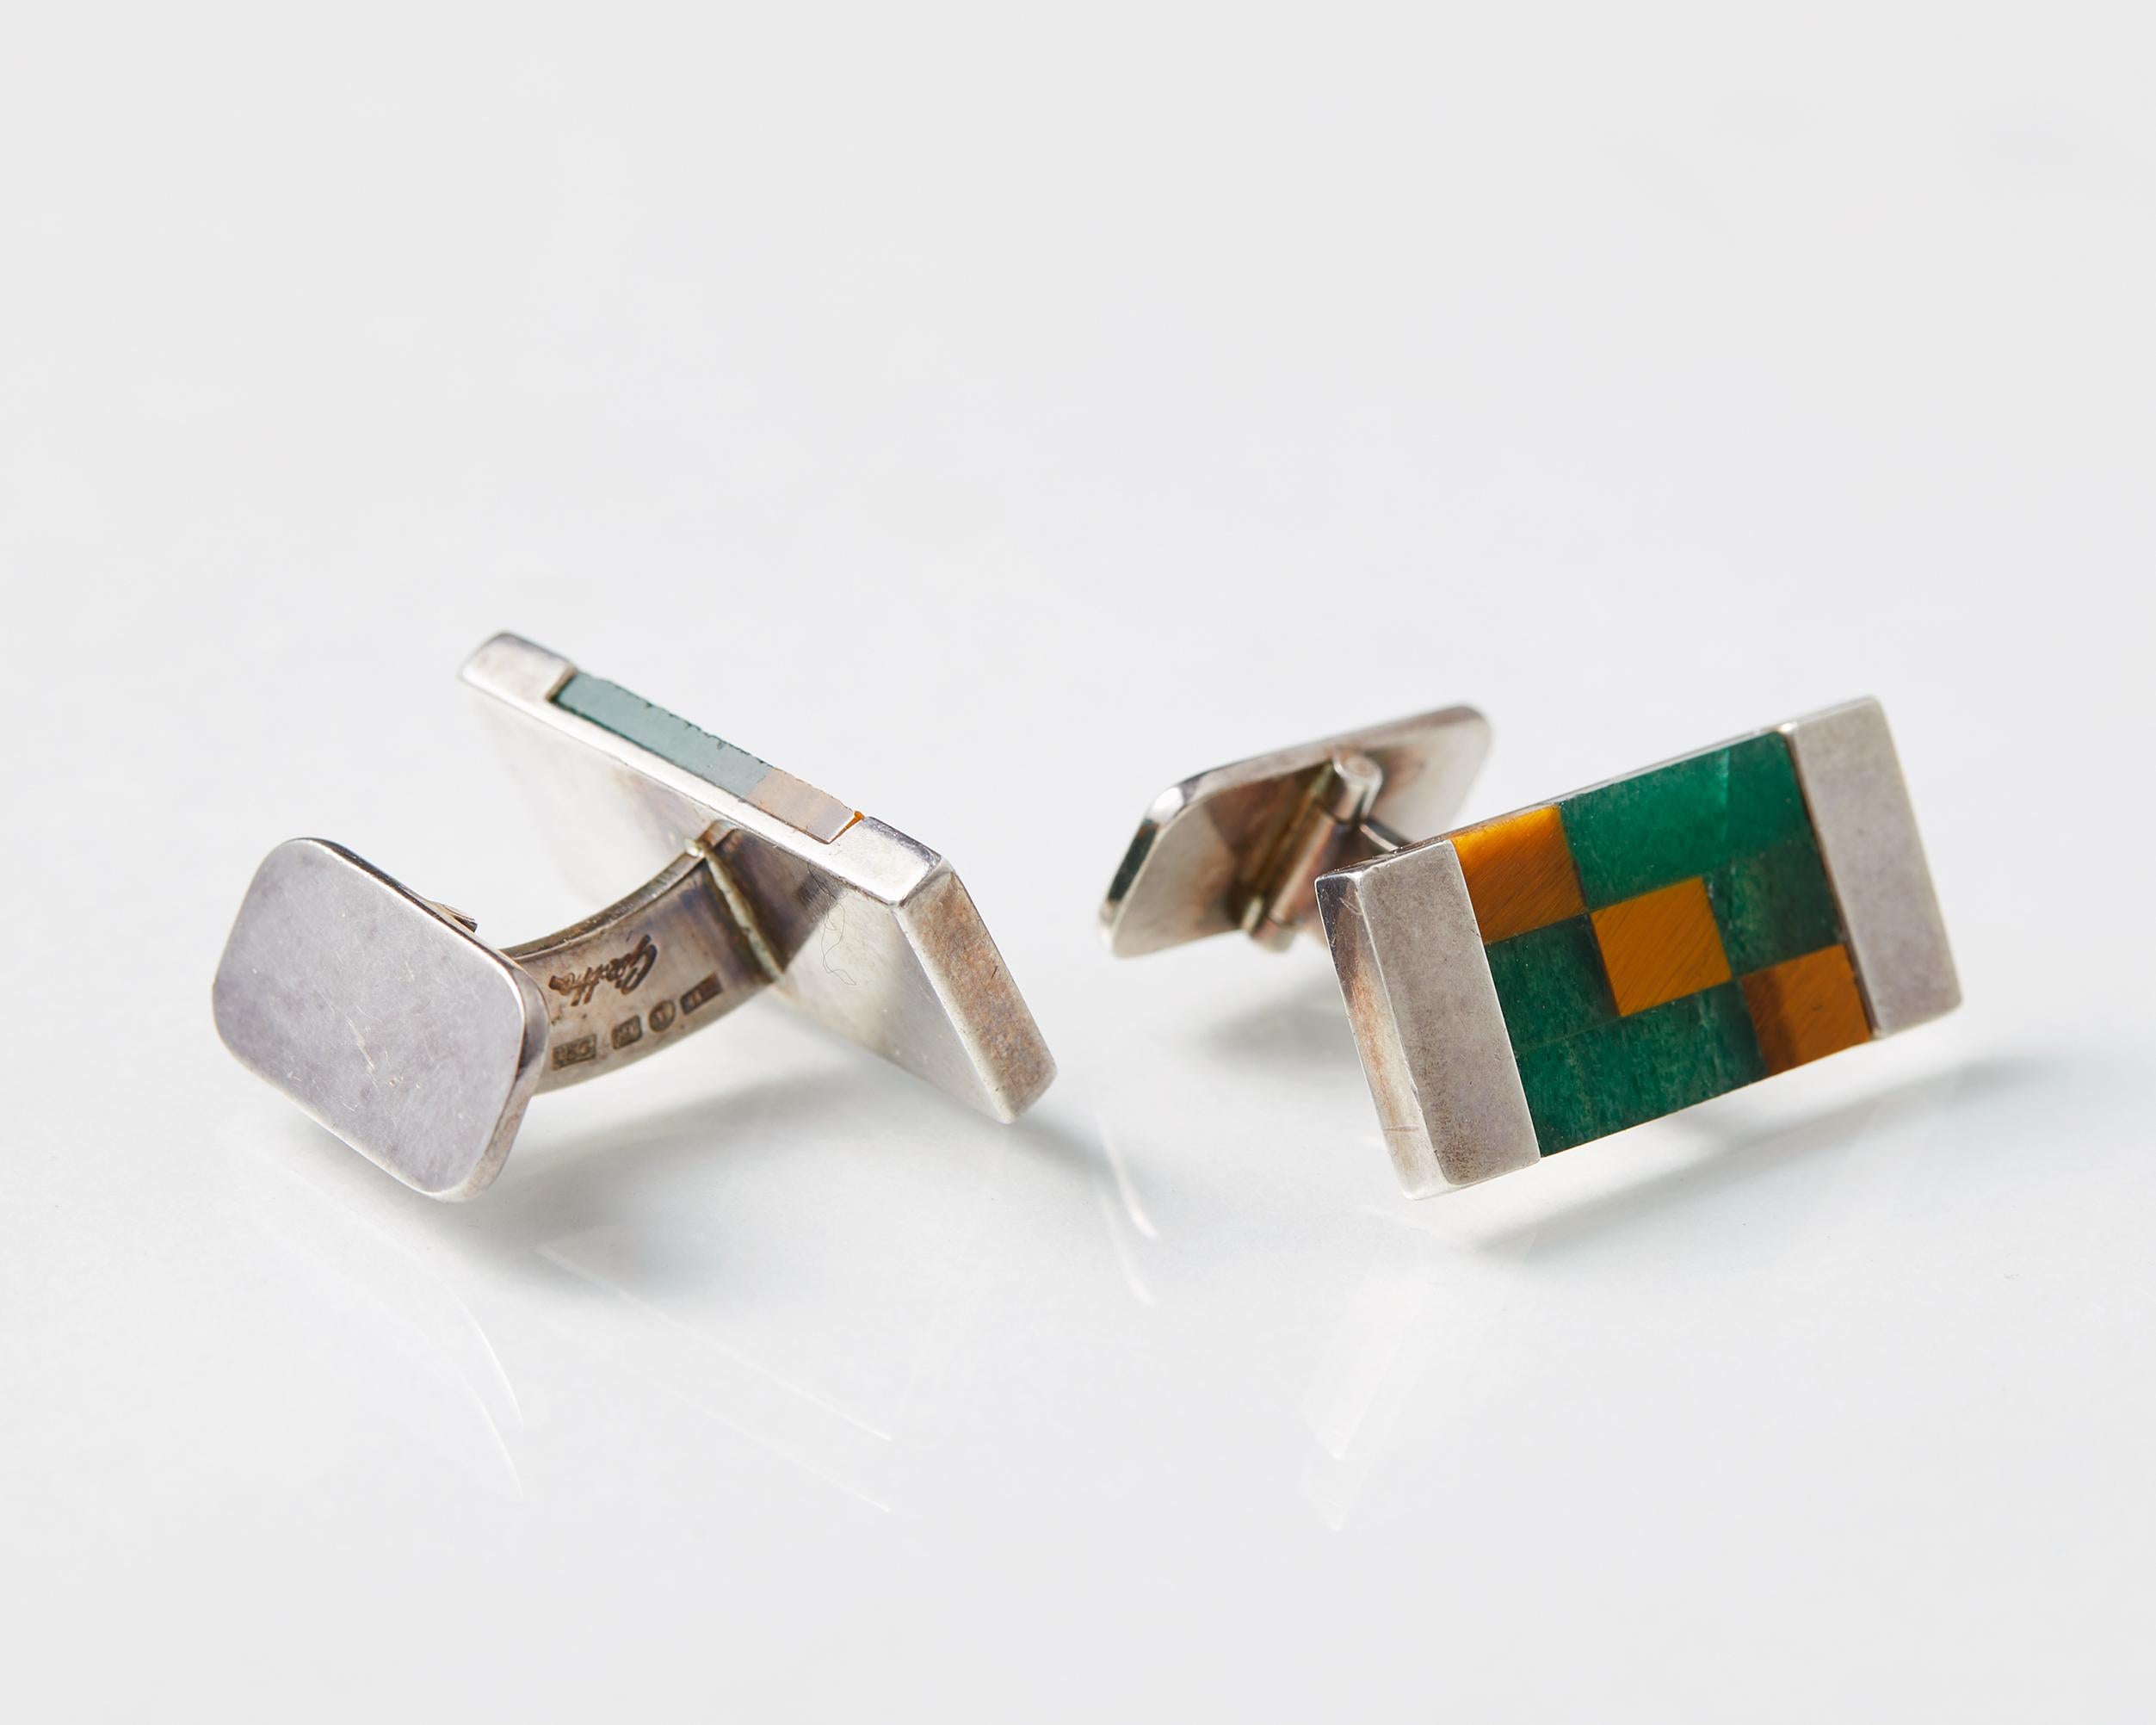 Pair of Cufflinks, Designed by Claes Giertta, Sweden, 1997 In Good Condition For Sale In Stockholm, SE